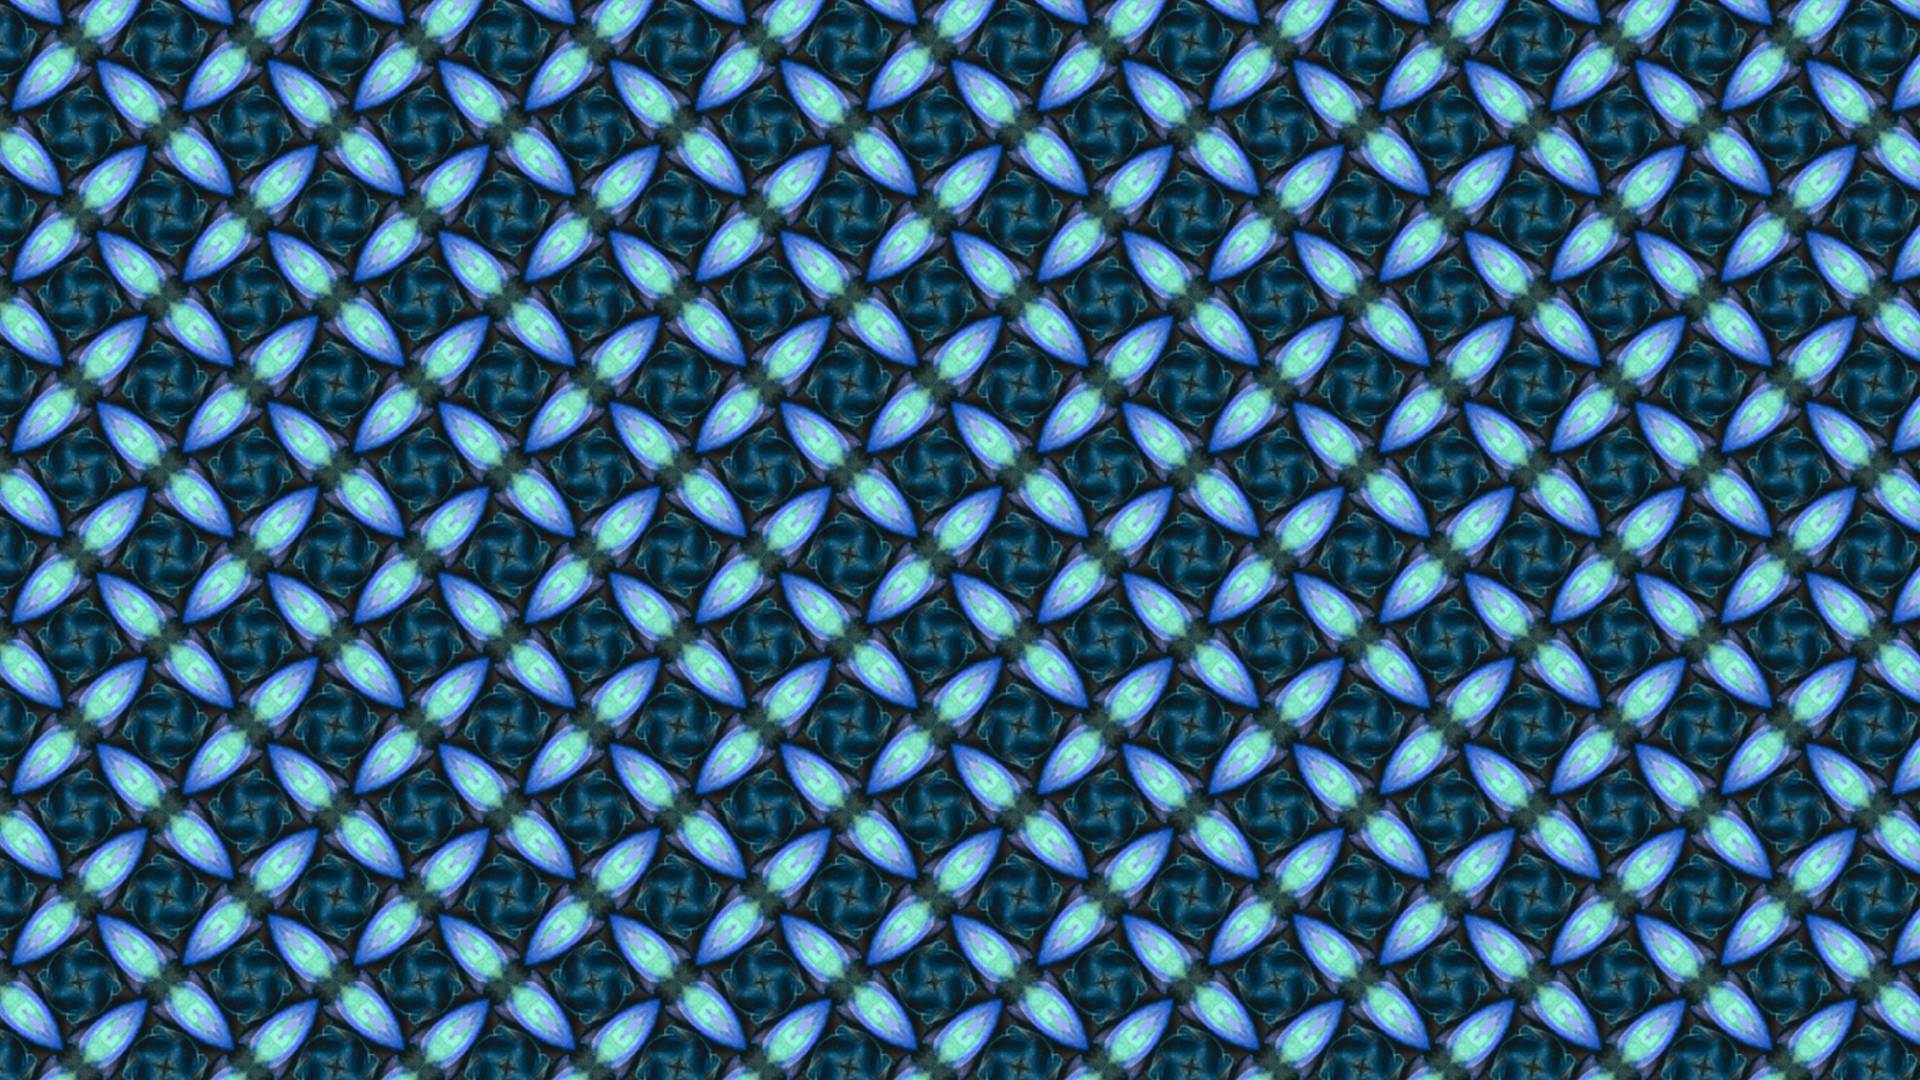 An insulating material using the symmetry principles behind wallpaper patterns